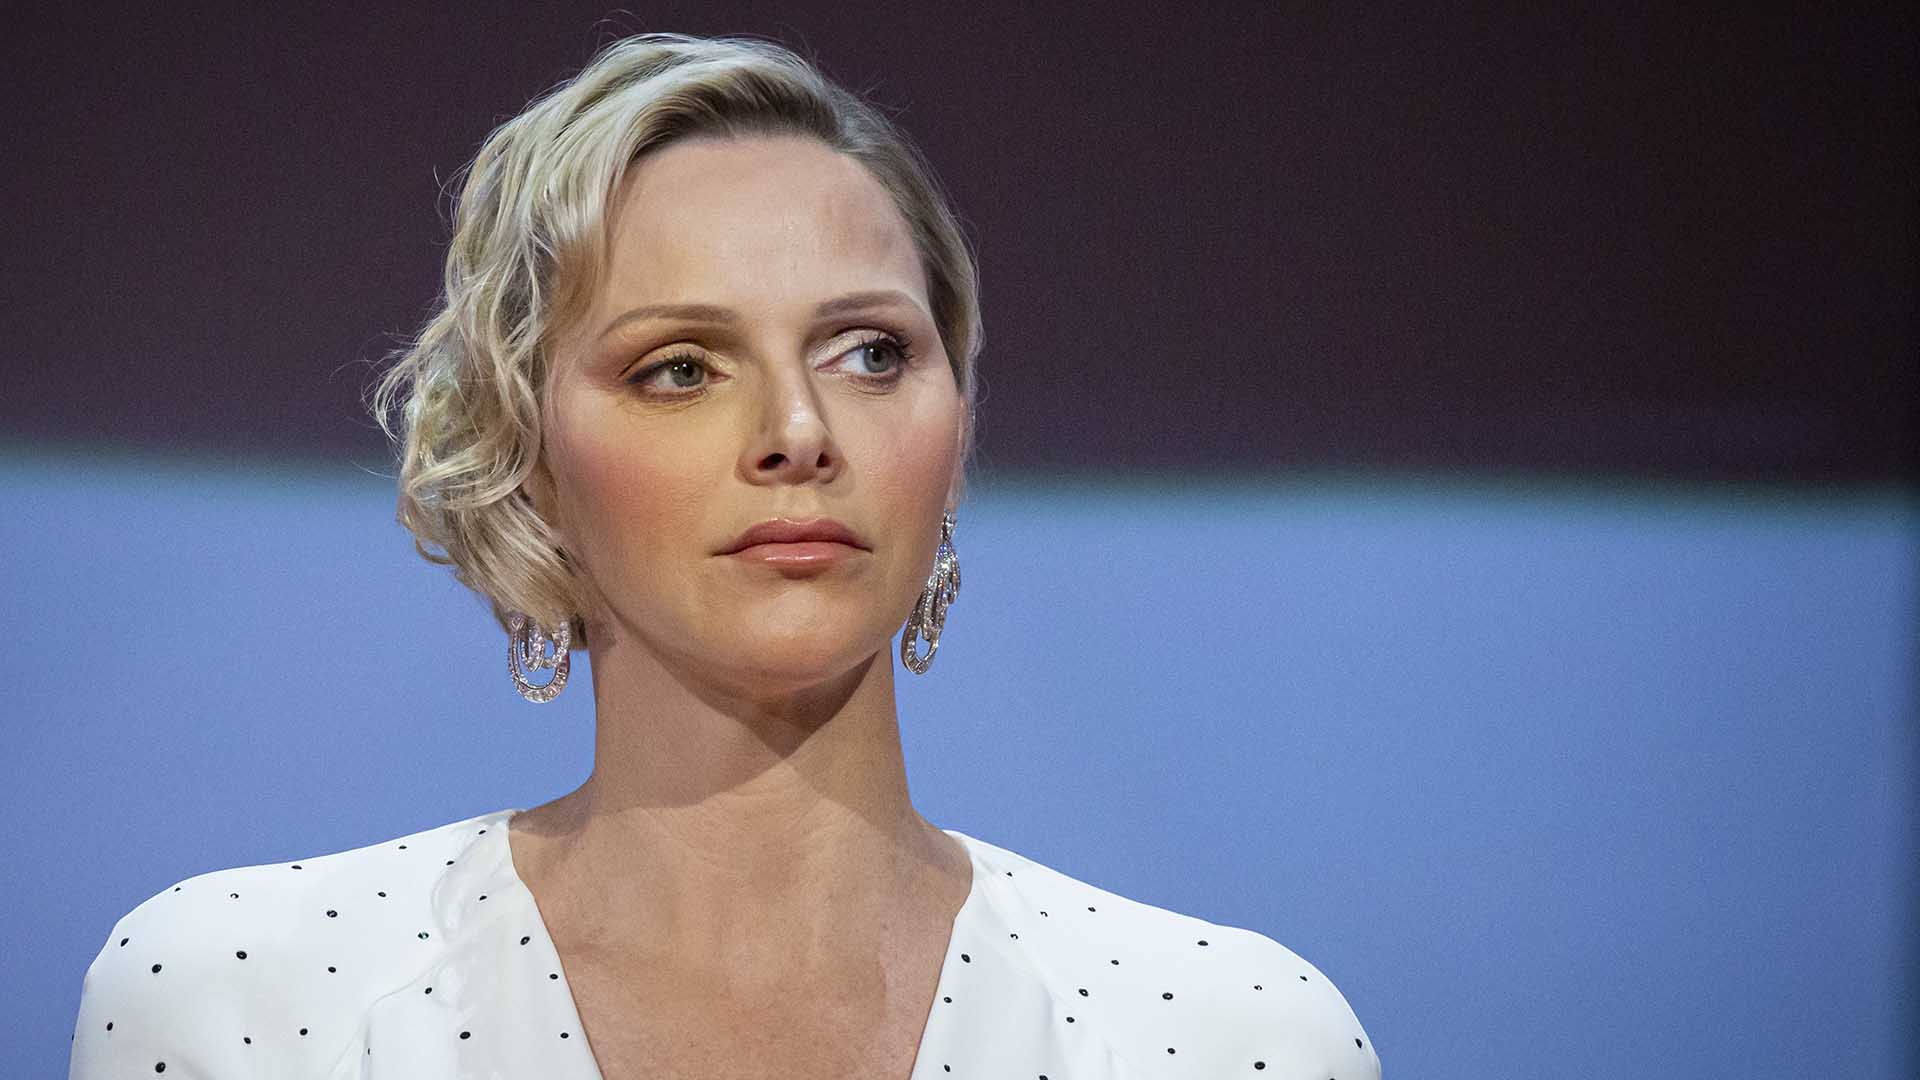 Princess Charlene during the closing ceremony of the 59th Monte-Carlo Television Festival in Monaco, June 18, 2019.  *** Local Caption *** .